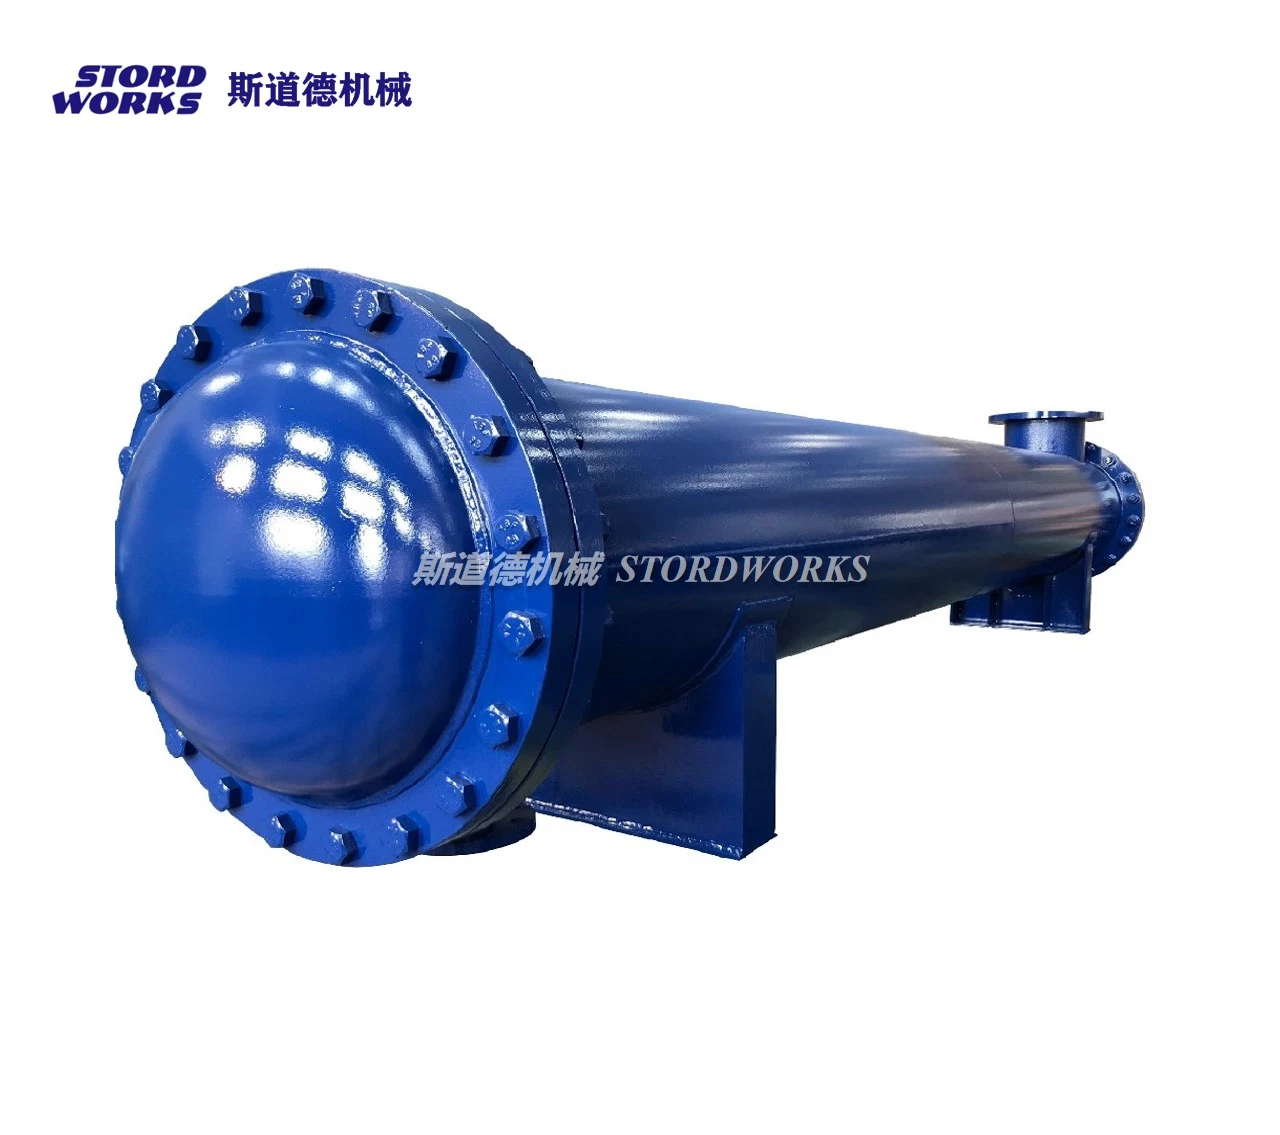 Stordworks Spiral Tube Type Tube Heat Exchanger Is Widely Used in Electricity